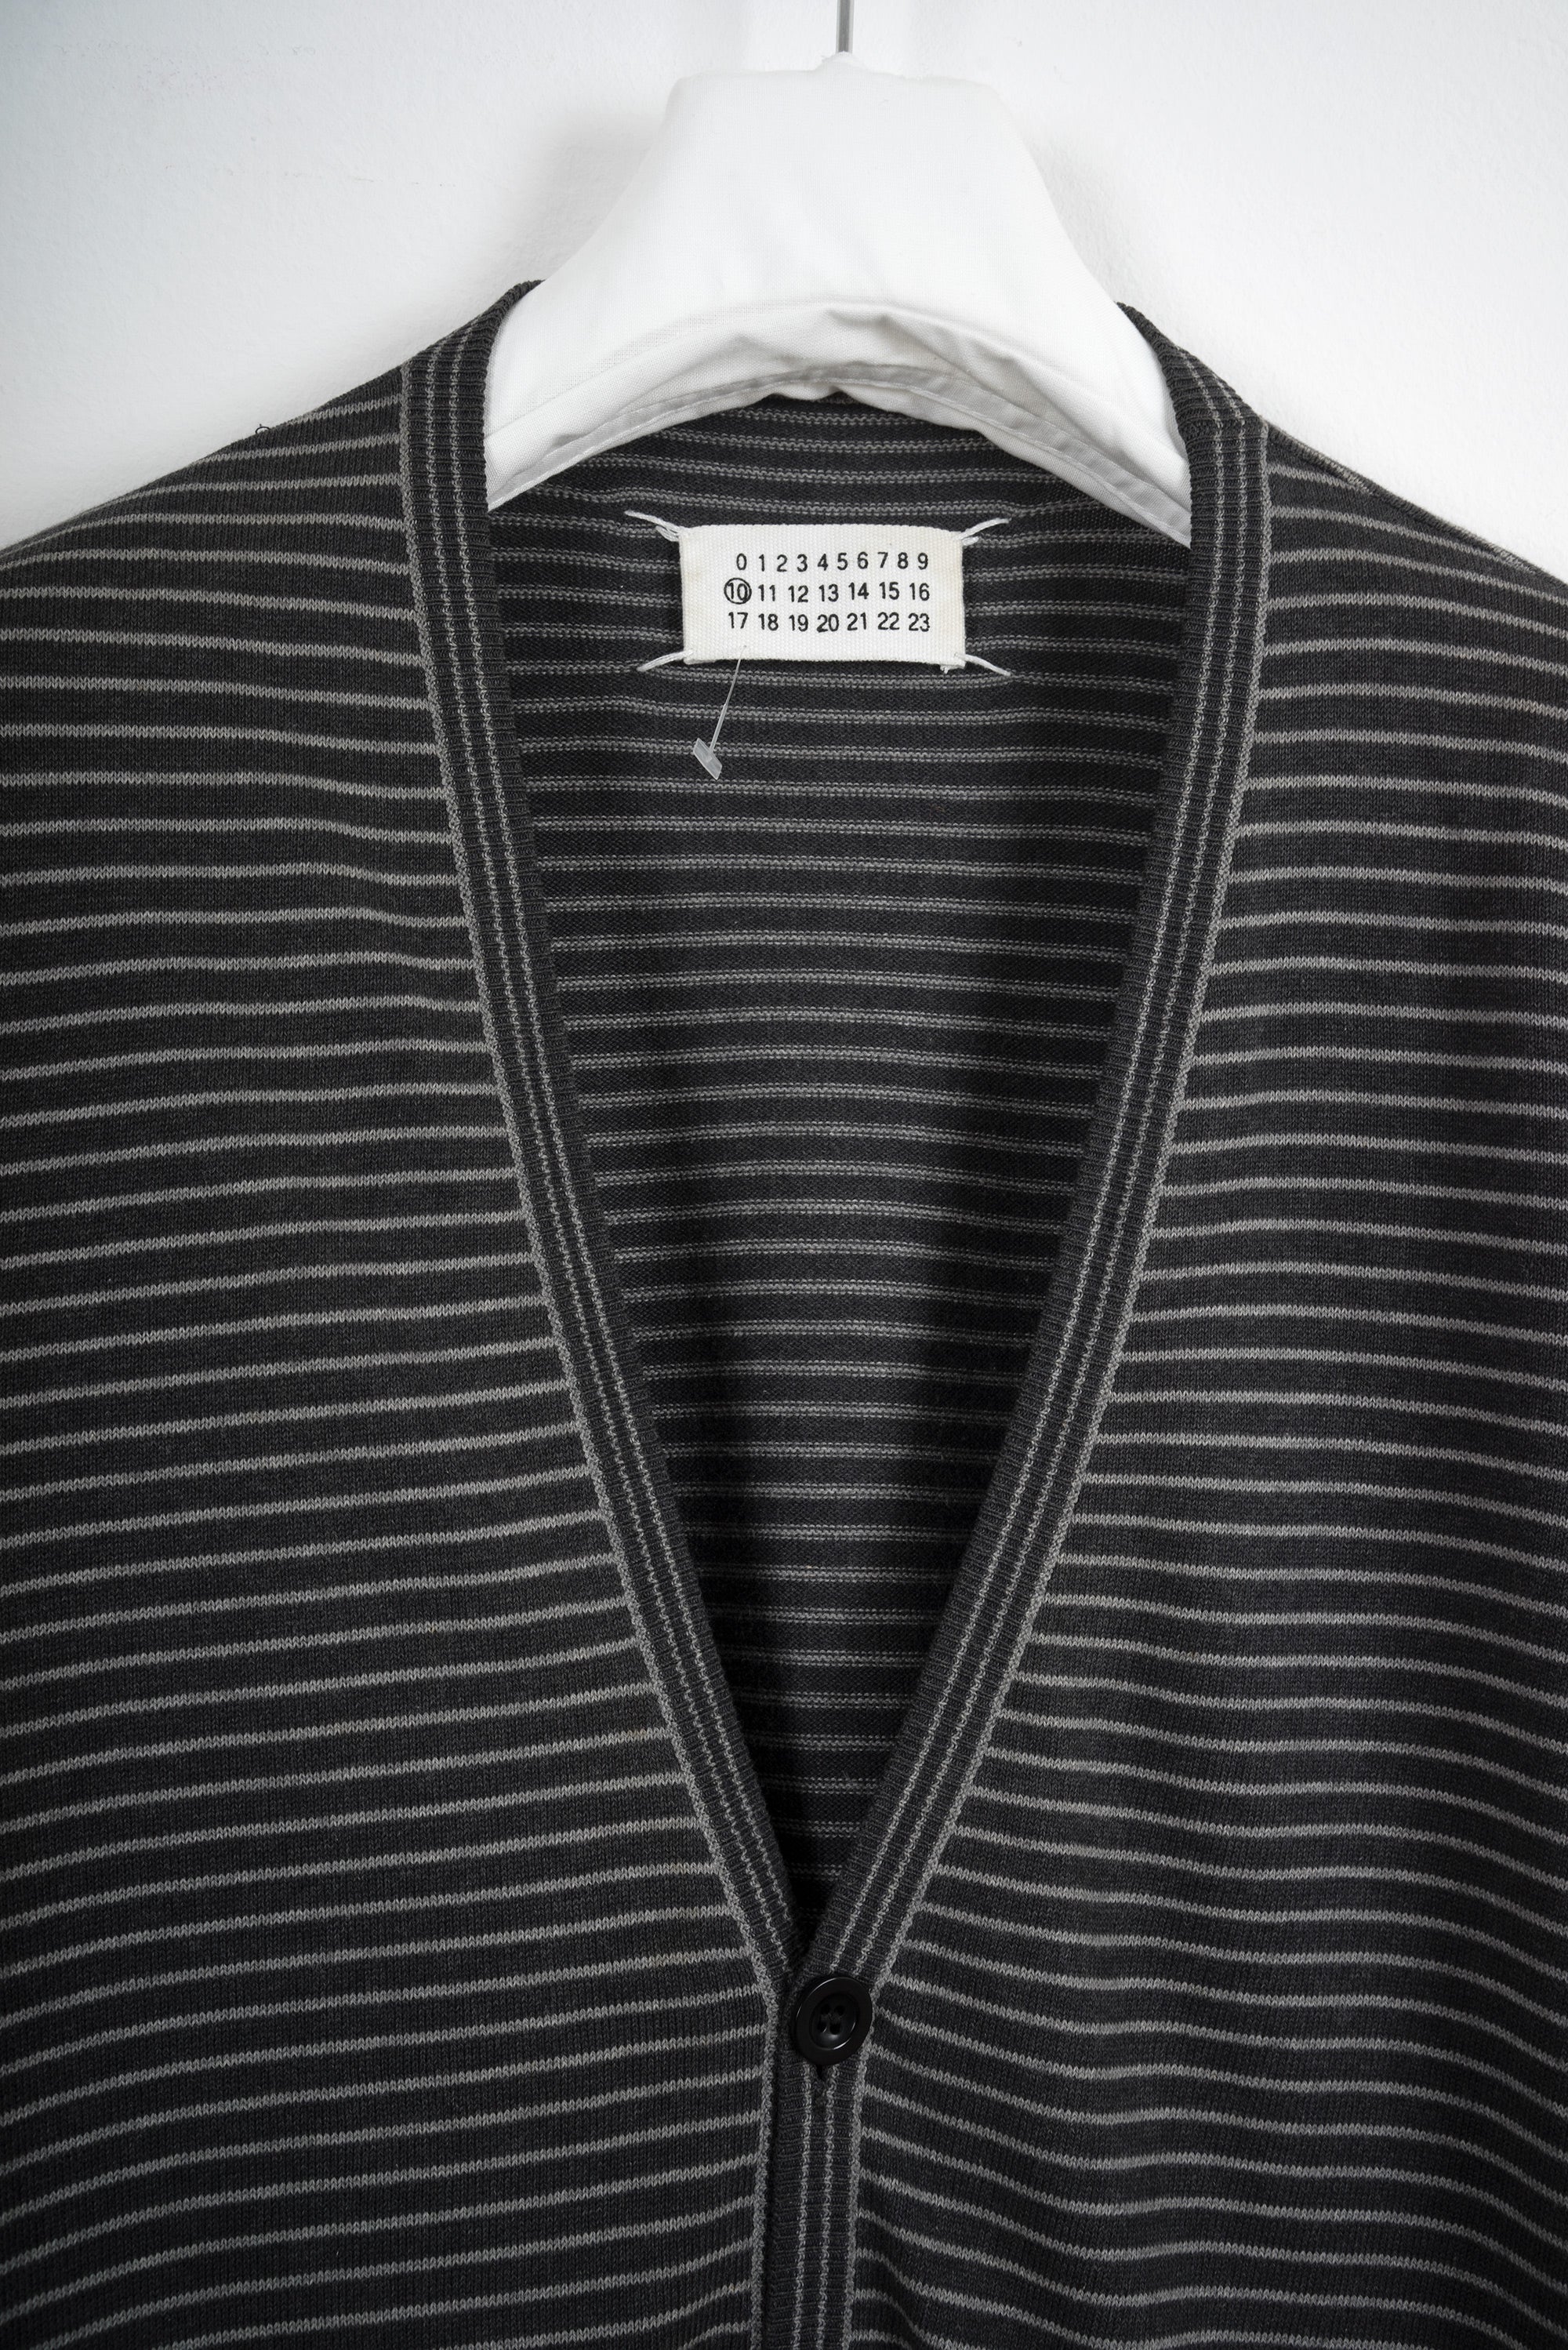 2007 S/S STRIPED CARDIGAN IN FINEST COTTON